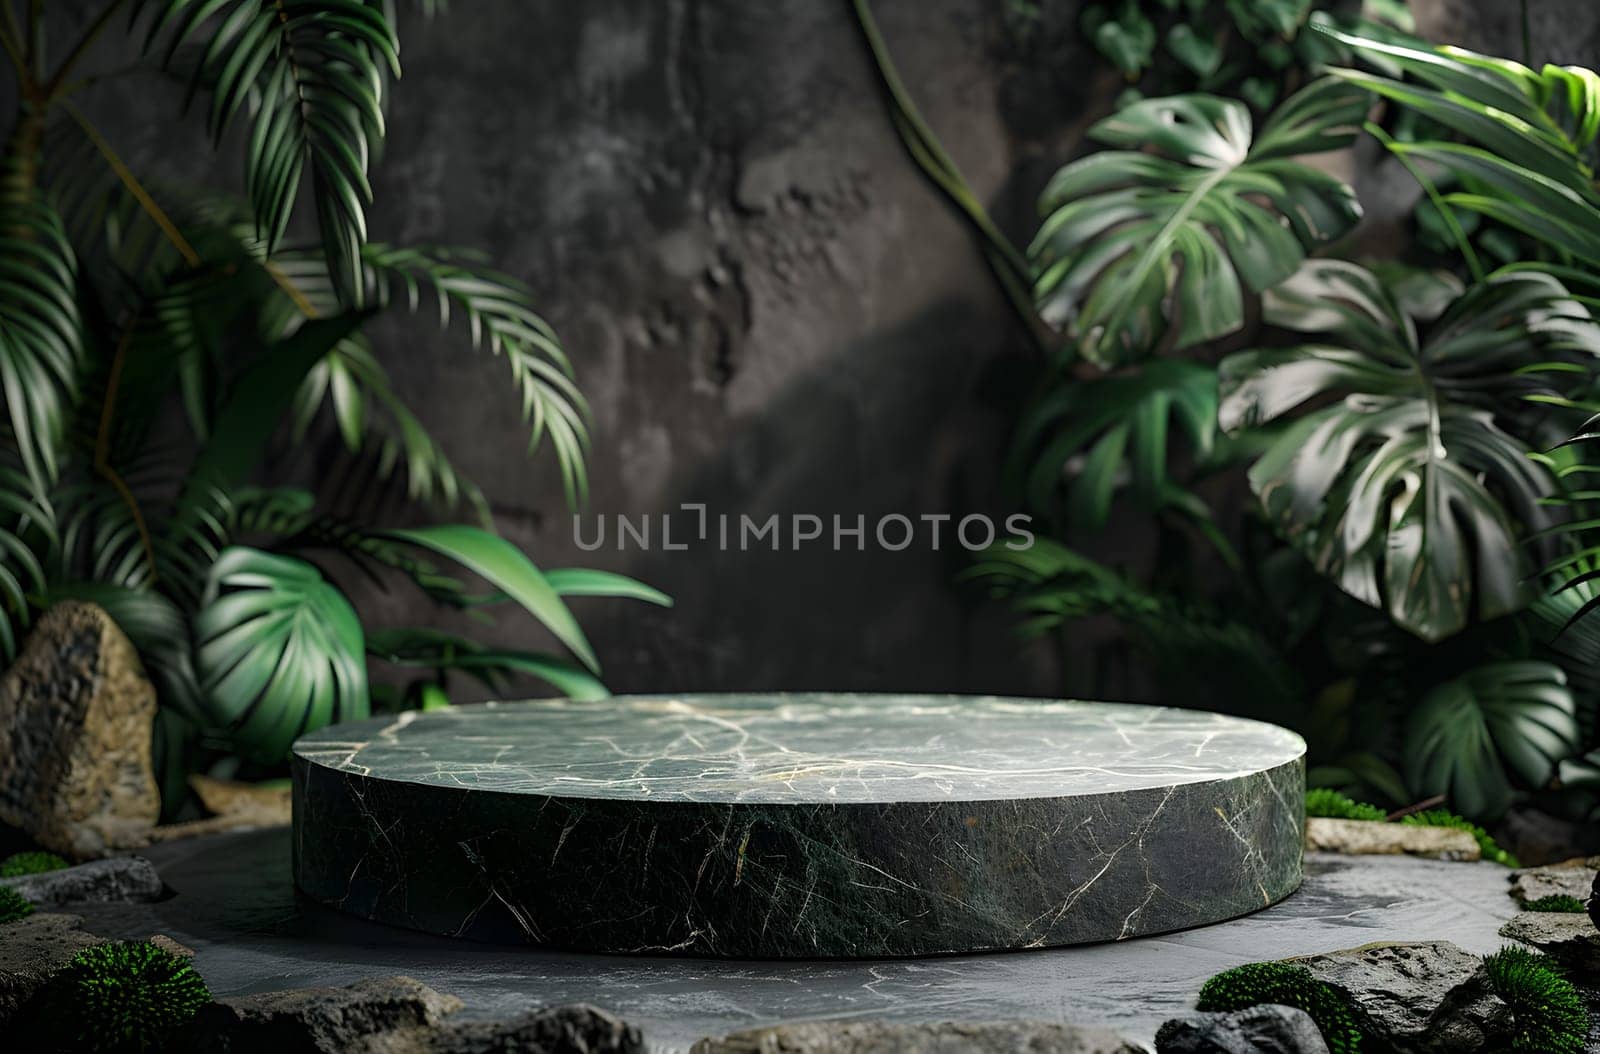 A marble podium amidst a jungle with plants, rocks, and natural landscape by Nadtochiy